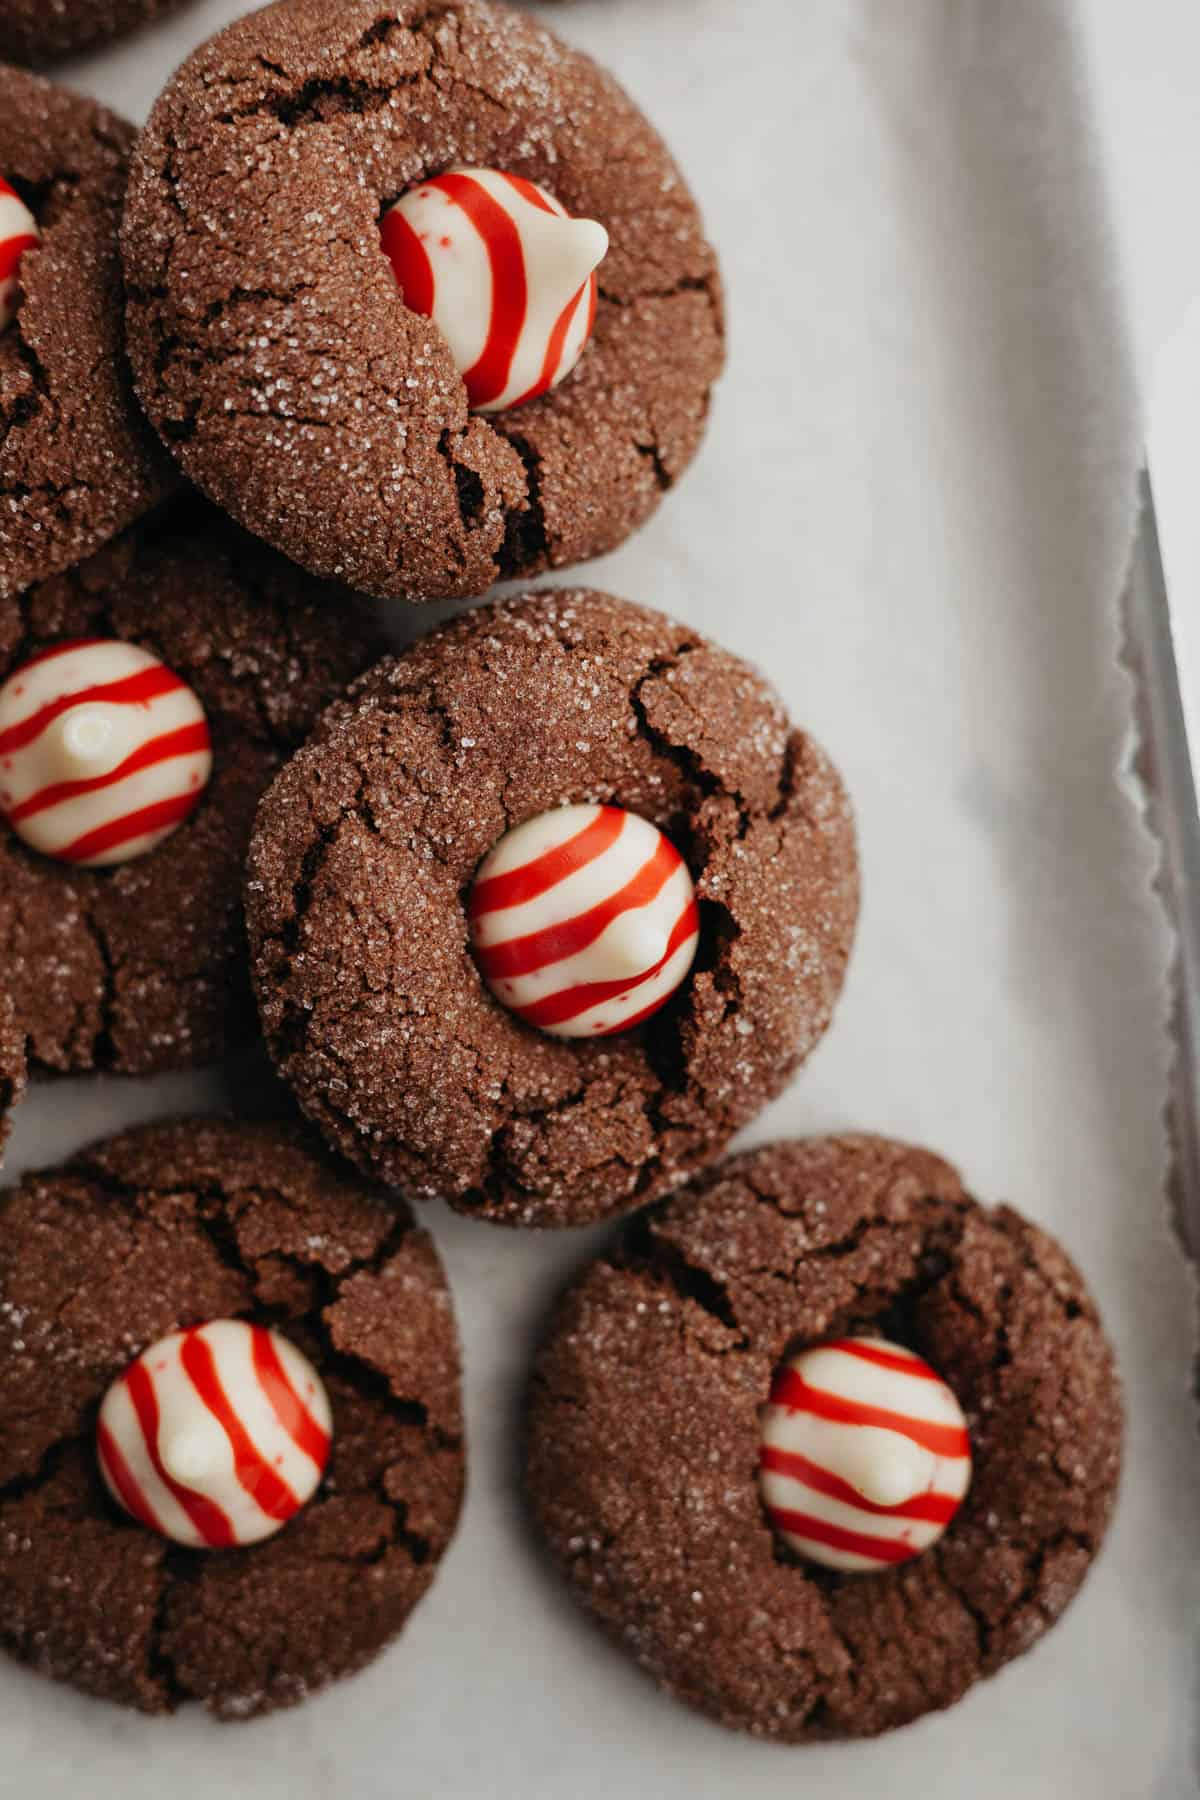 Overhead image of chocolate thumbprint cookies with a candy cane kiss in the middle.